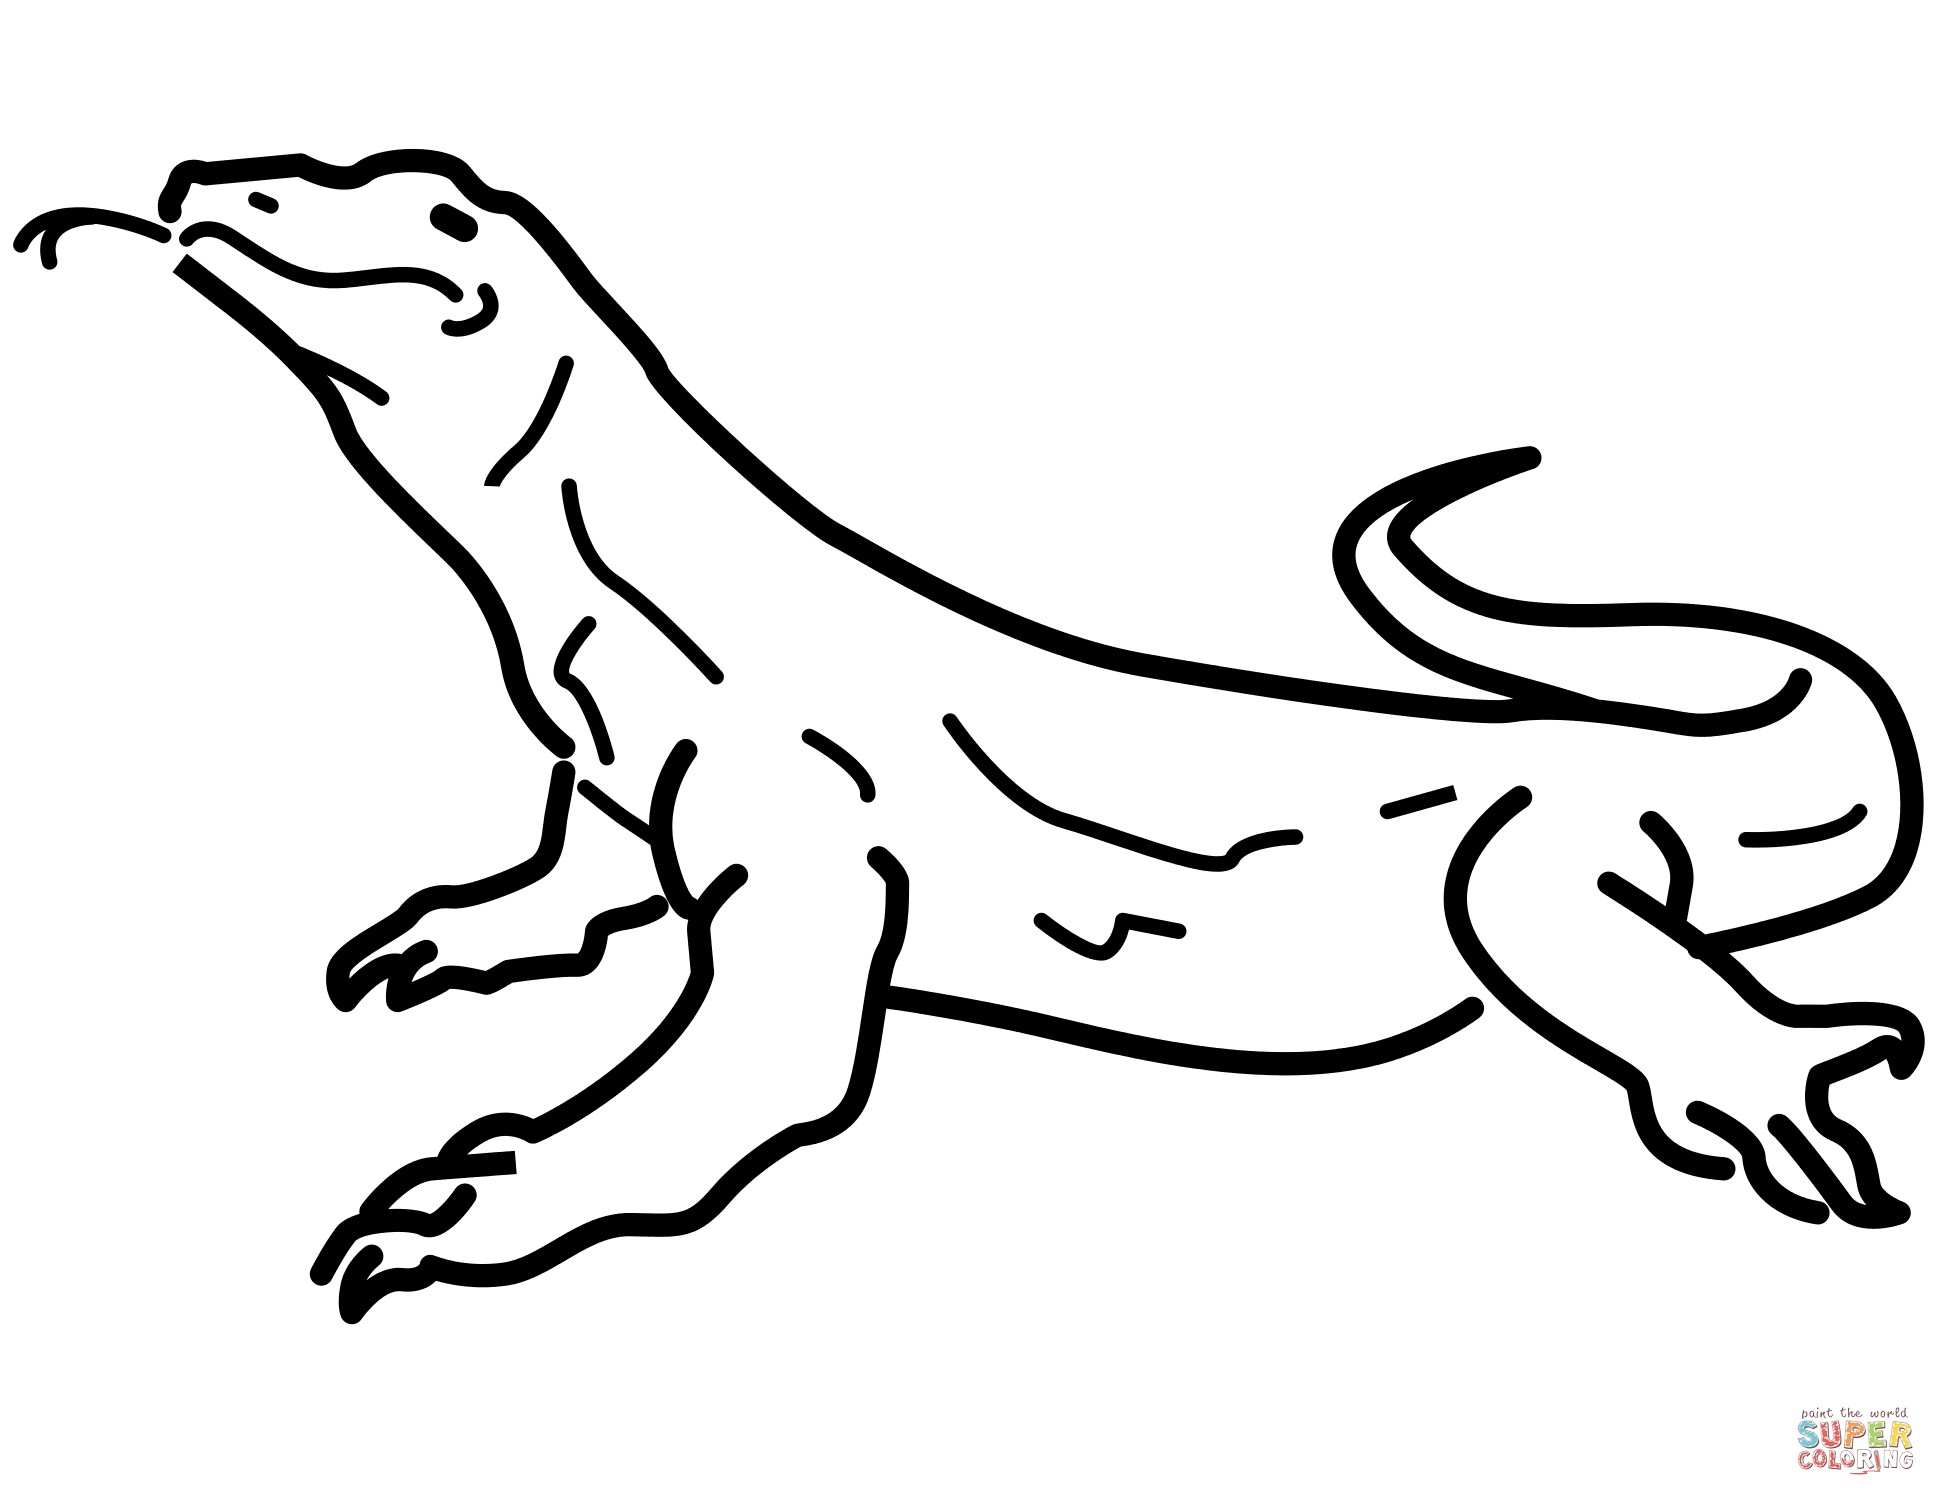 Realistic Lizard Coloring Pages at GetColorings.com | Free printable